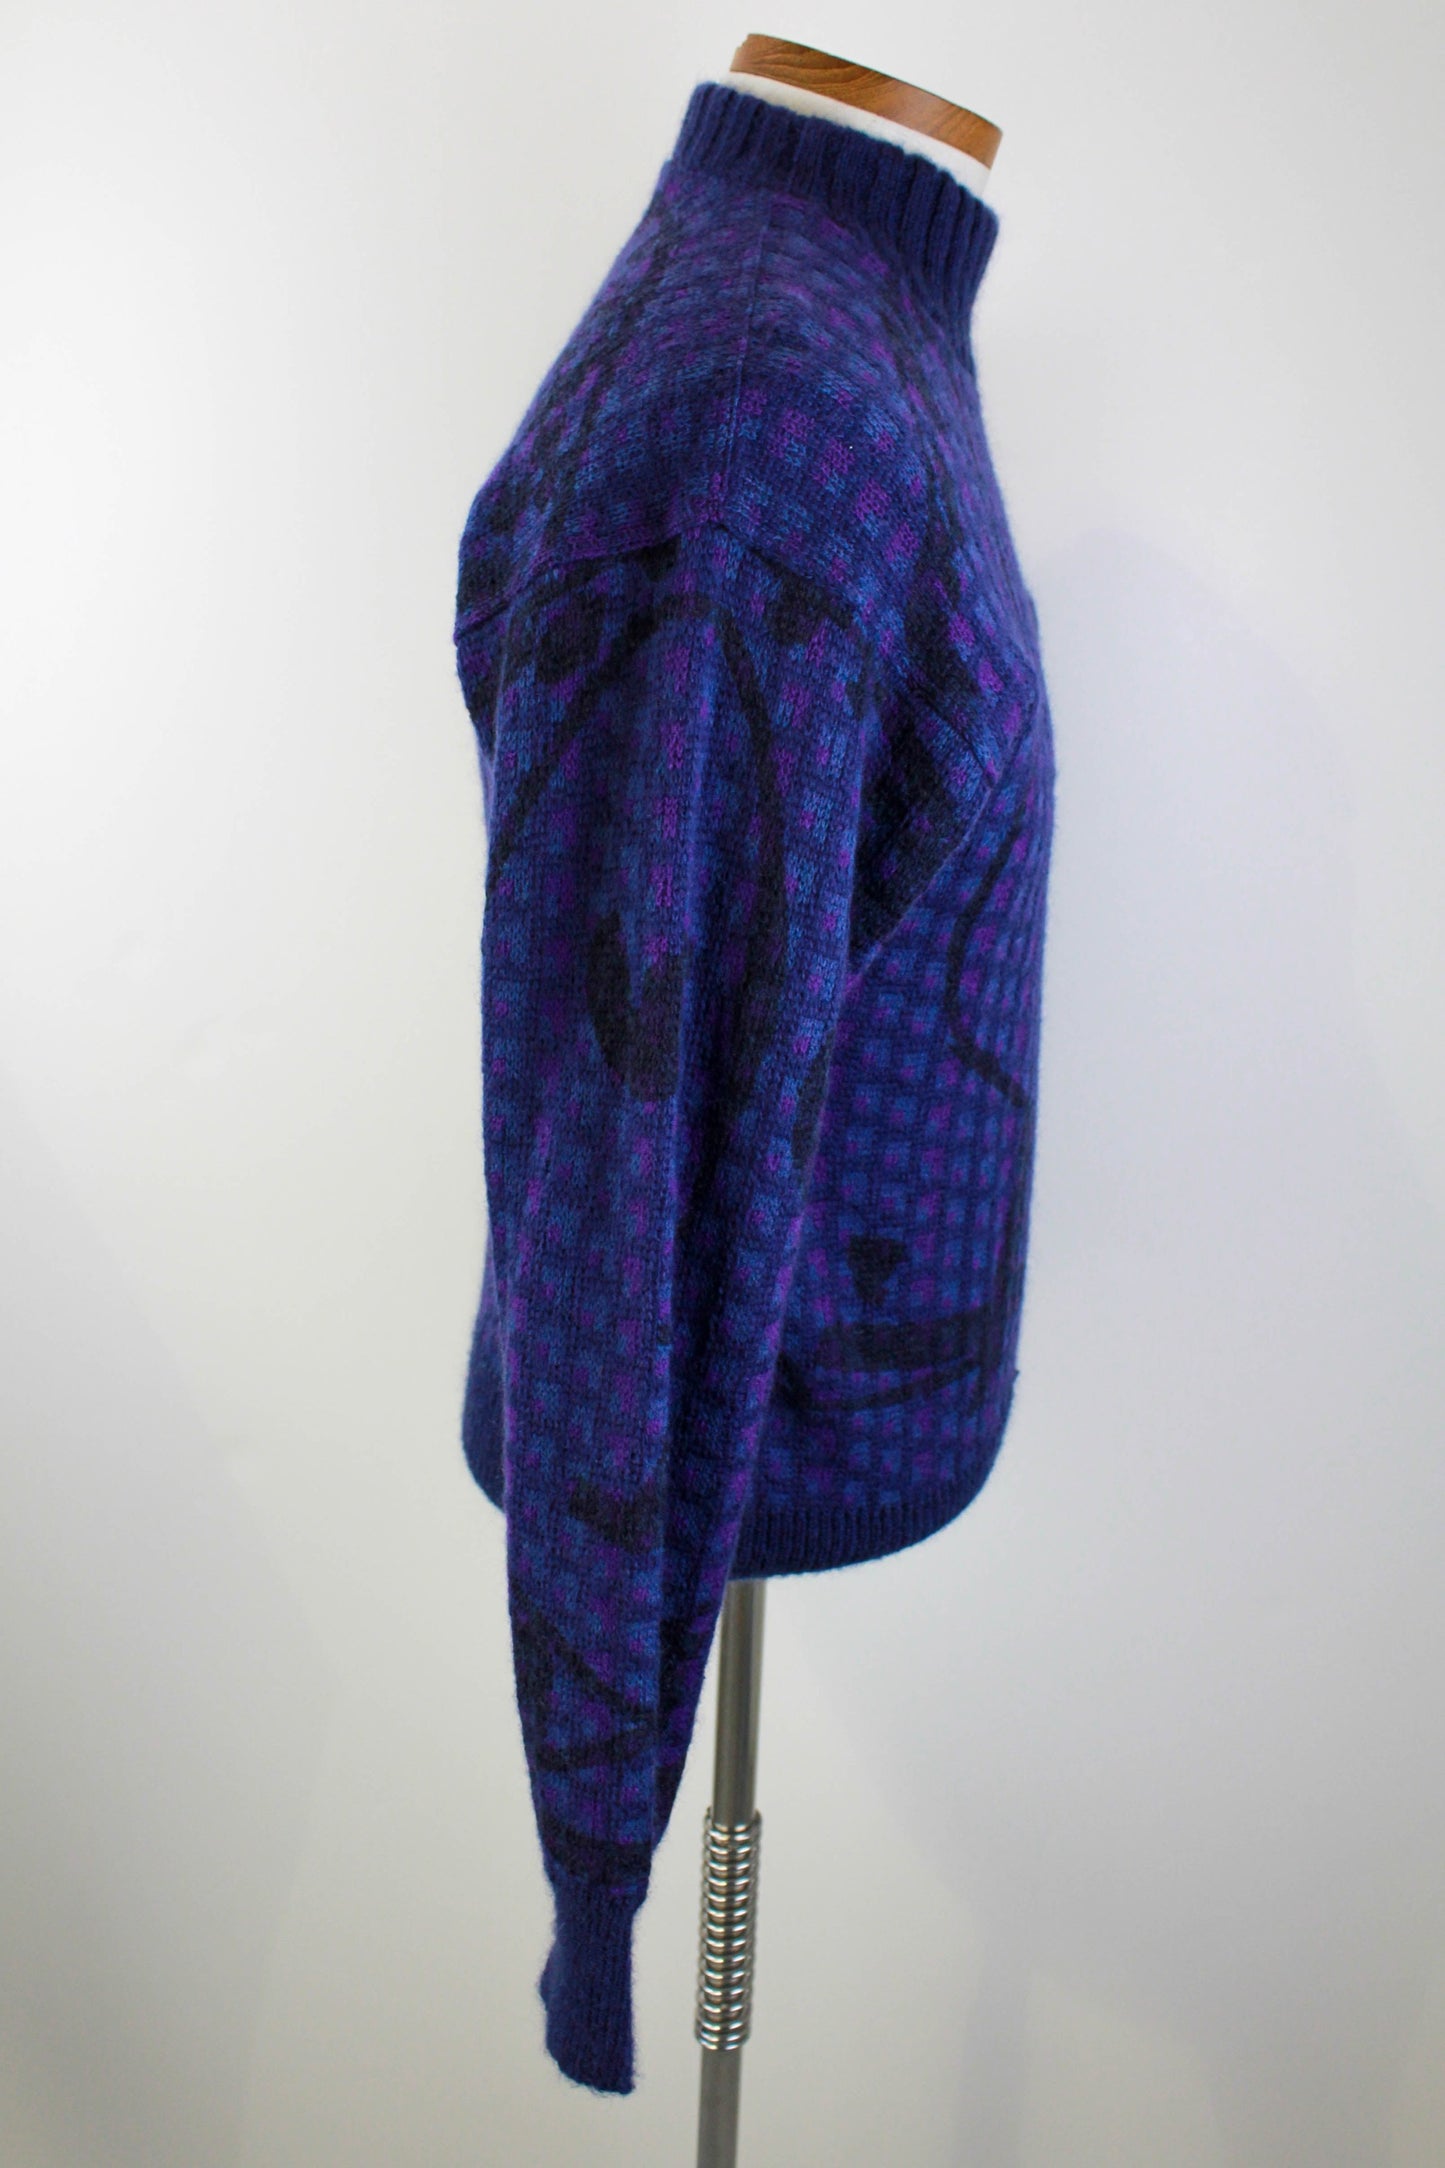 80s 90s Tino Cosmo Sweater with Abstract Face Knit design, Purple and Blue, Turtleneck Vintage Wool Sweater